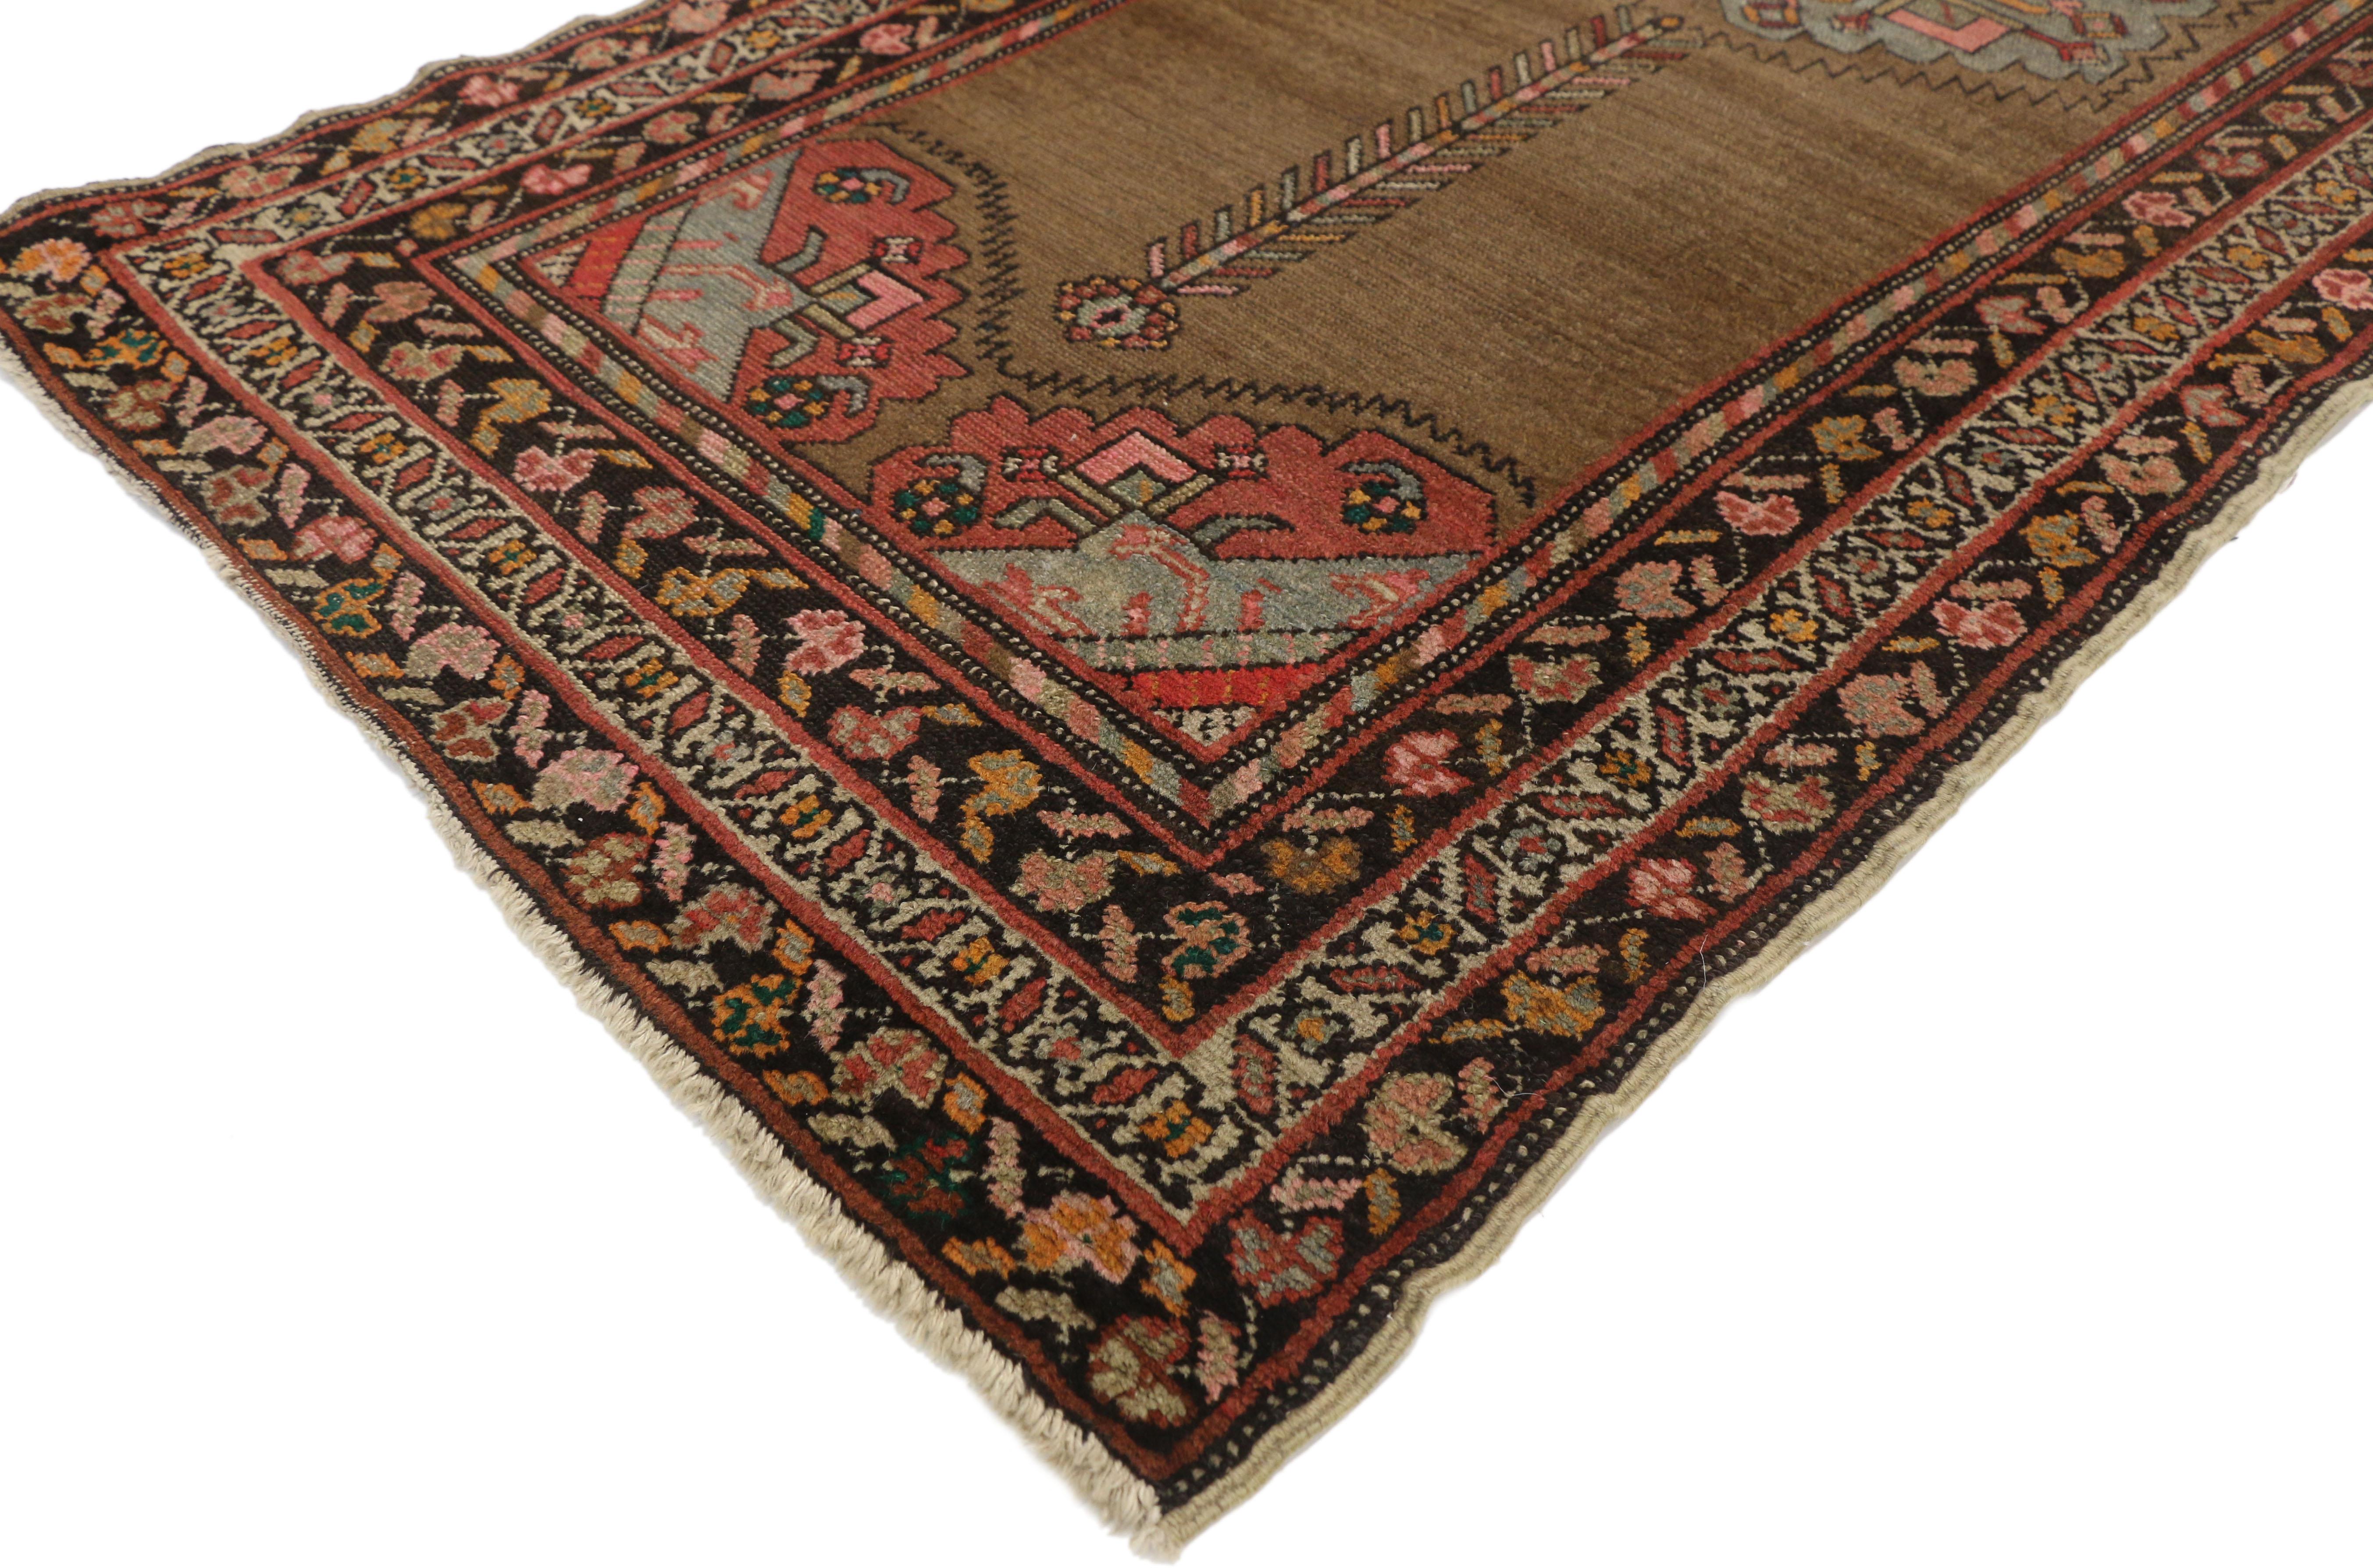 77305 Antique Persian Malayer Hallway Runner with Mid-Century Modern Style 03'02 x 12'11. This hand knotted wool antique Persian Malayer runner features a distinctive pole medallion design in an open abrashed field. Three cusped medallions each